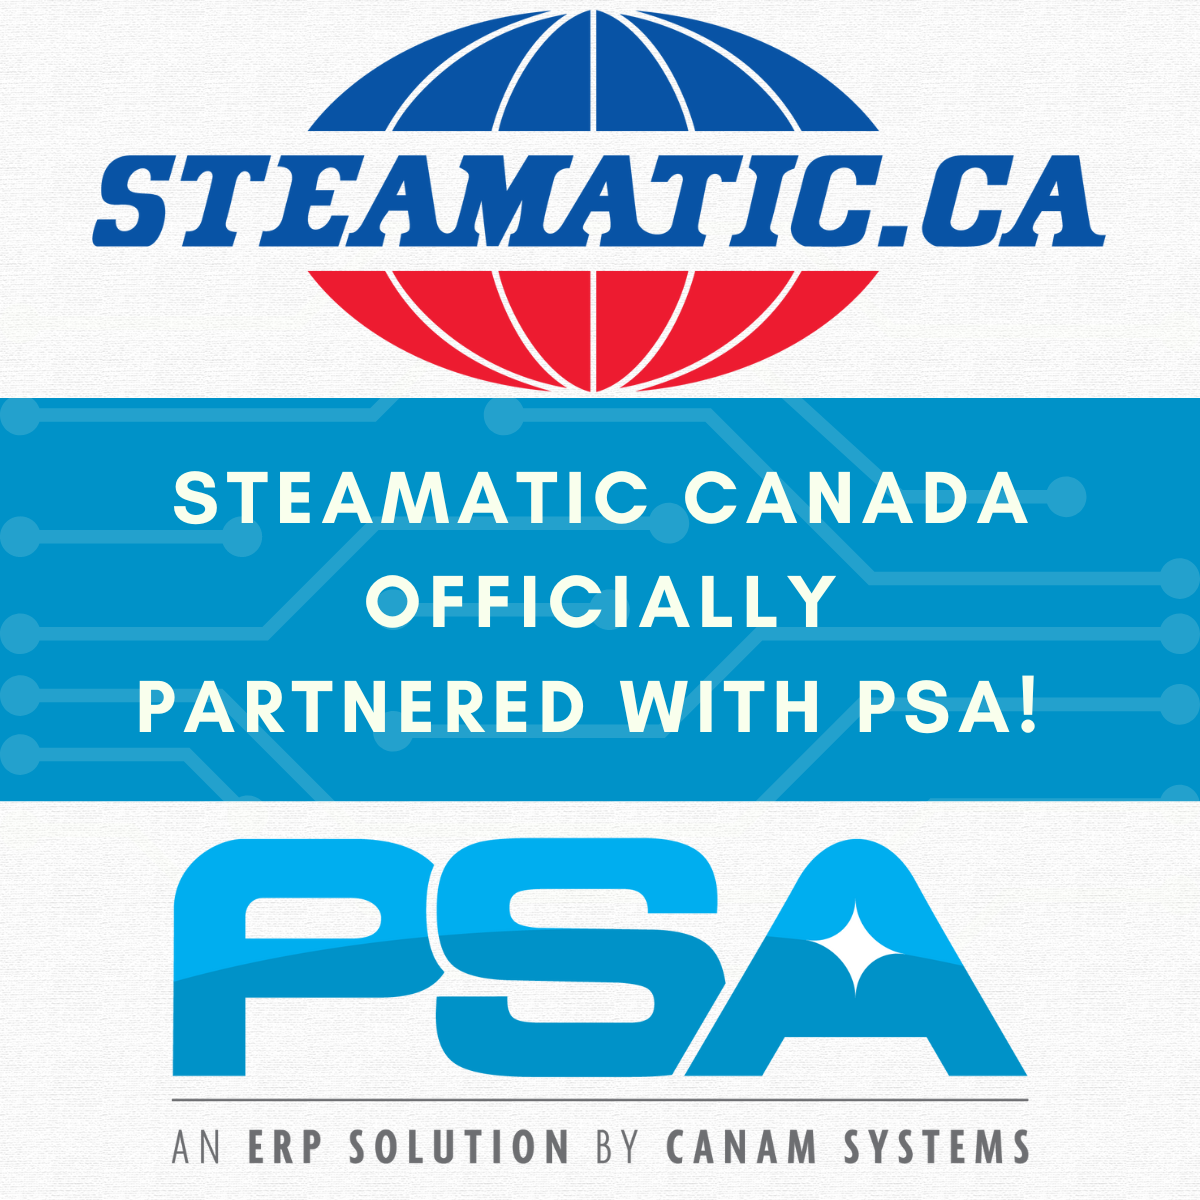 Steamatic Canada chooses PSA as their Restoration Technology Provider